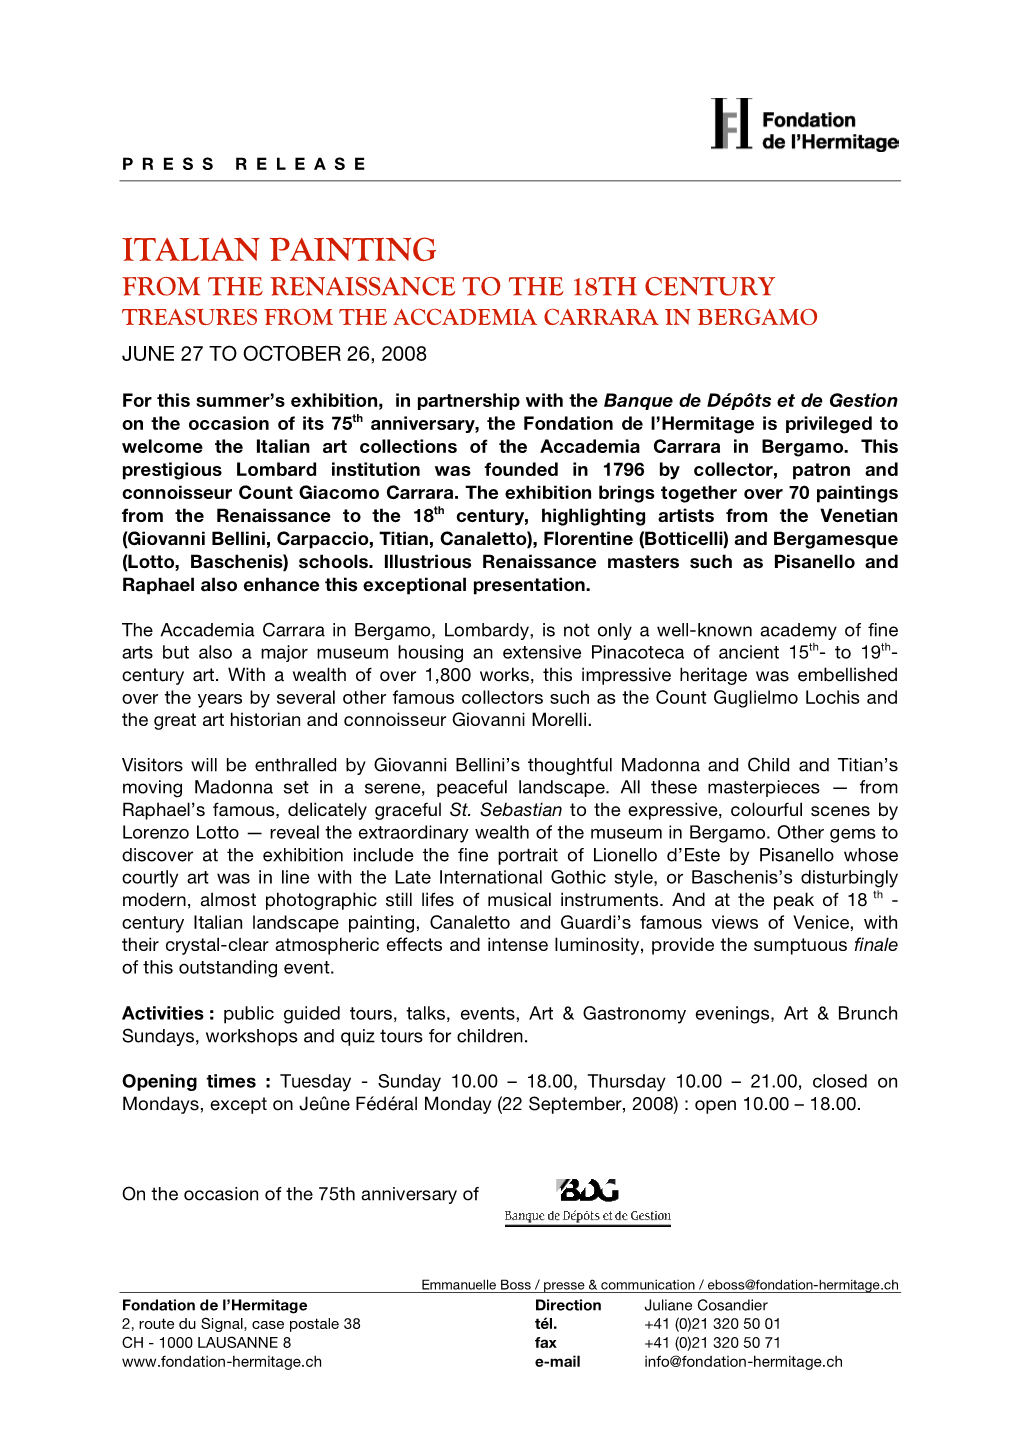 Italian Painting from the Renaissance to the 18Th Century Treasures from the Accademia Carrara in Bergamo June 27 to October 26, 2008